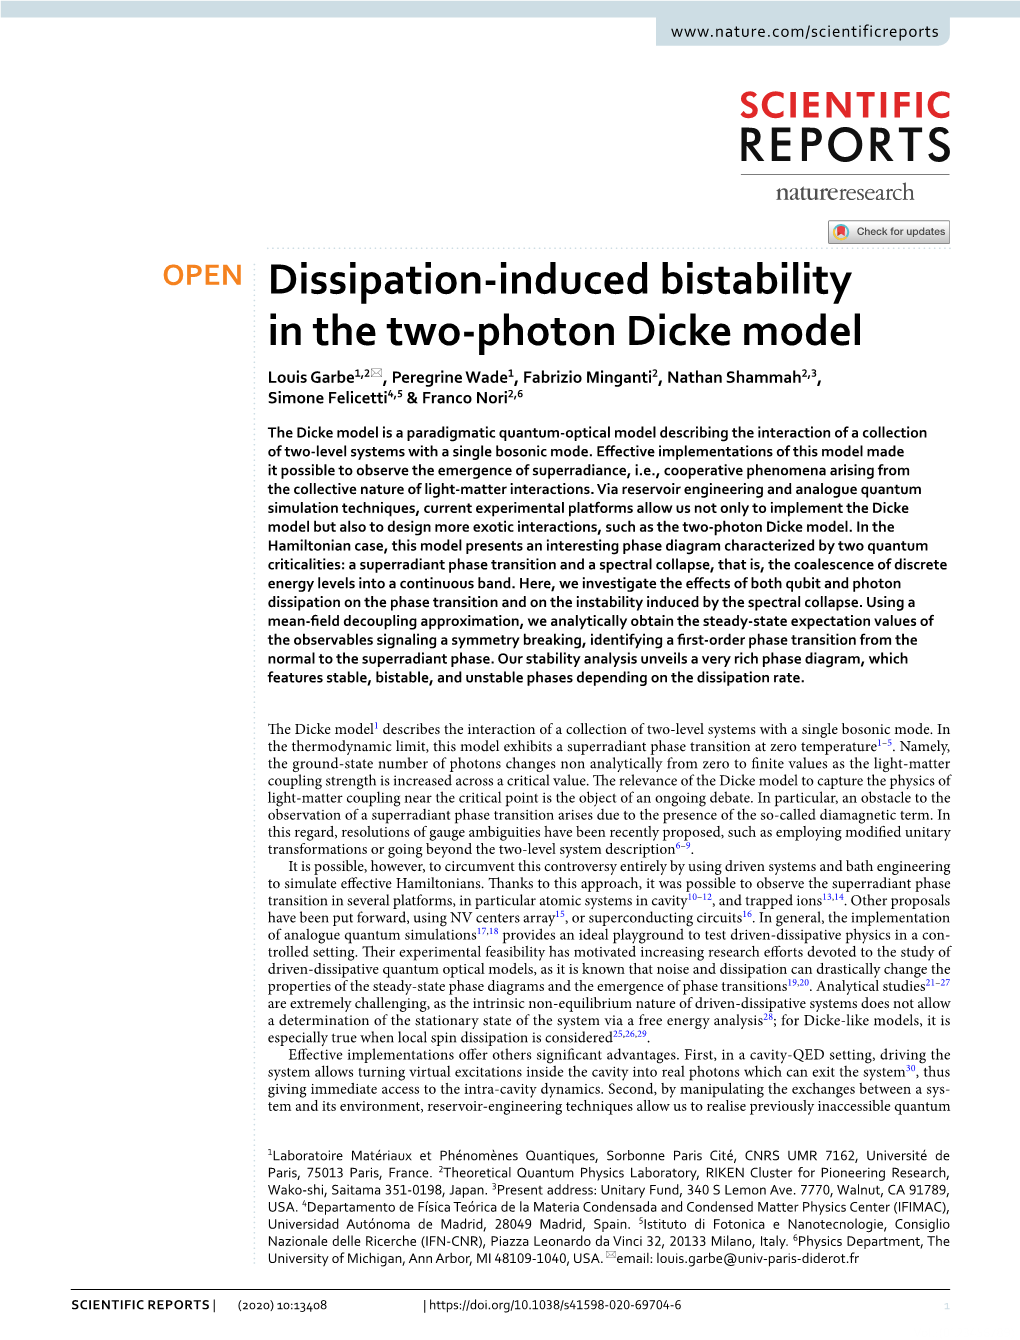 Dissipation-Induced Bistability in the Two-Photon Dicke Model